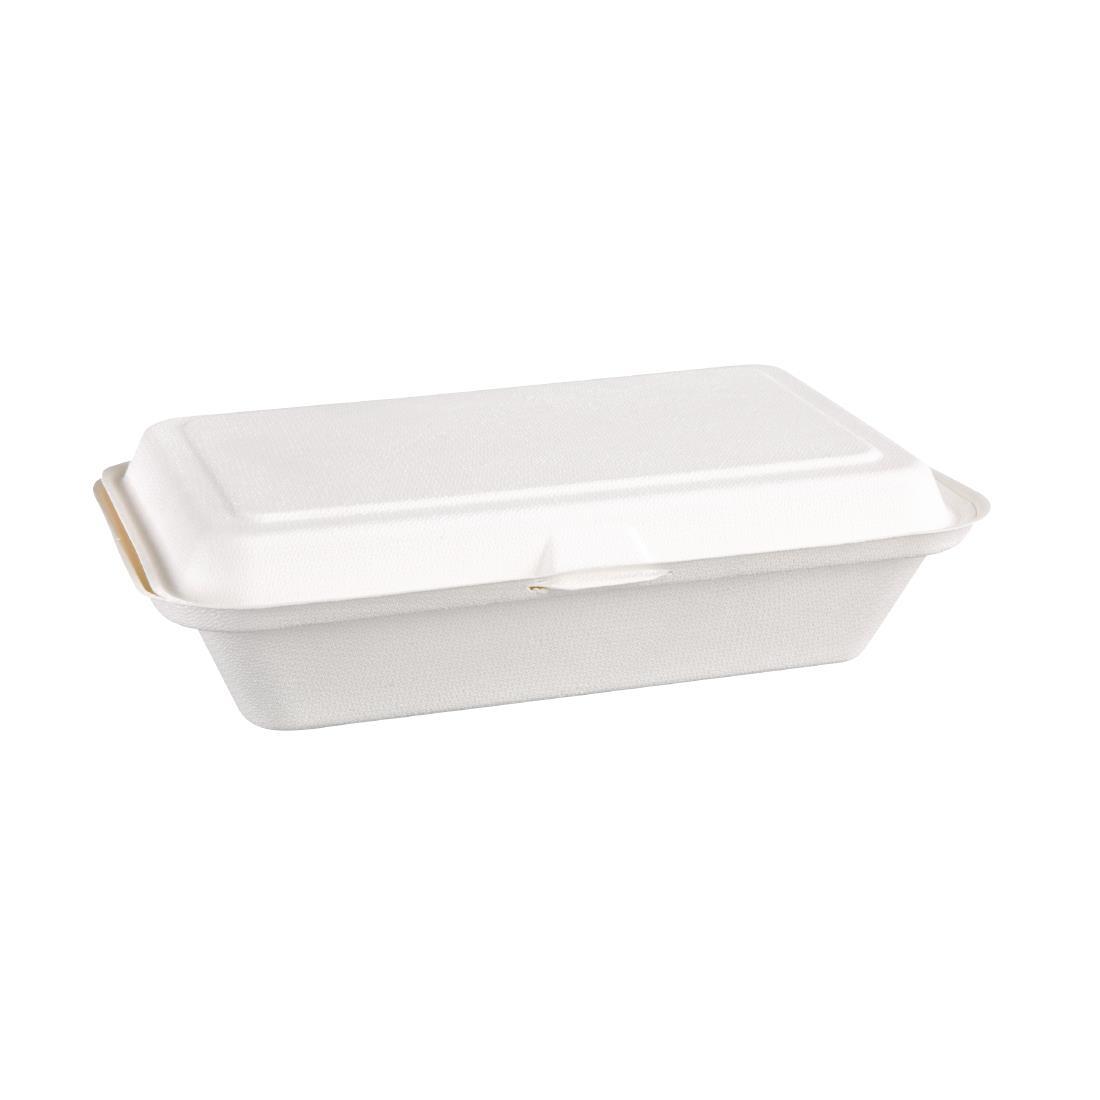 Fiesta Compostable Bagasse Hinged Food Containers 248mm - DW249  - 2